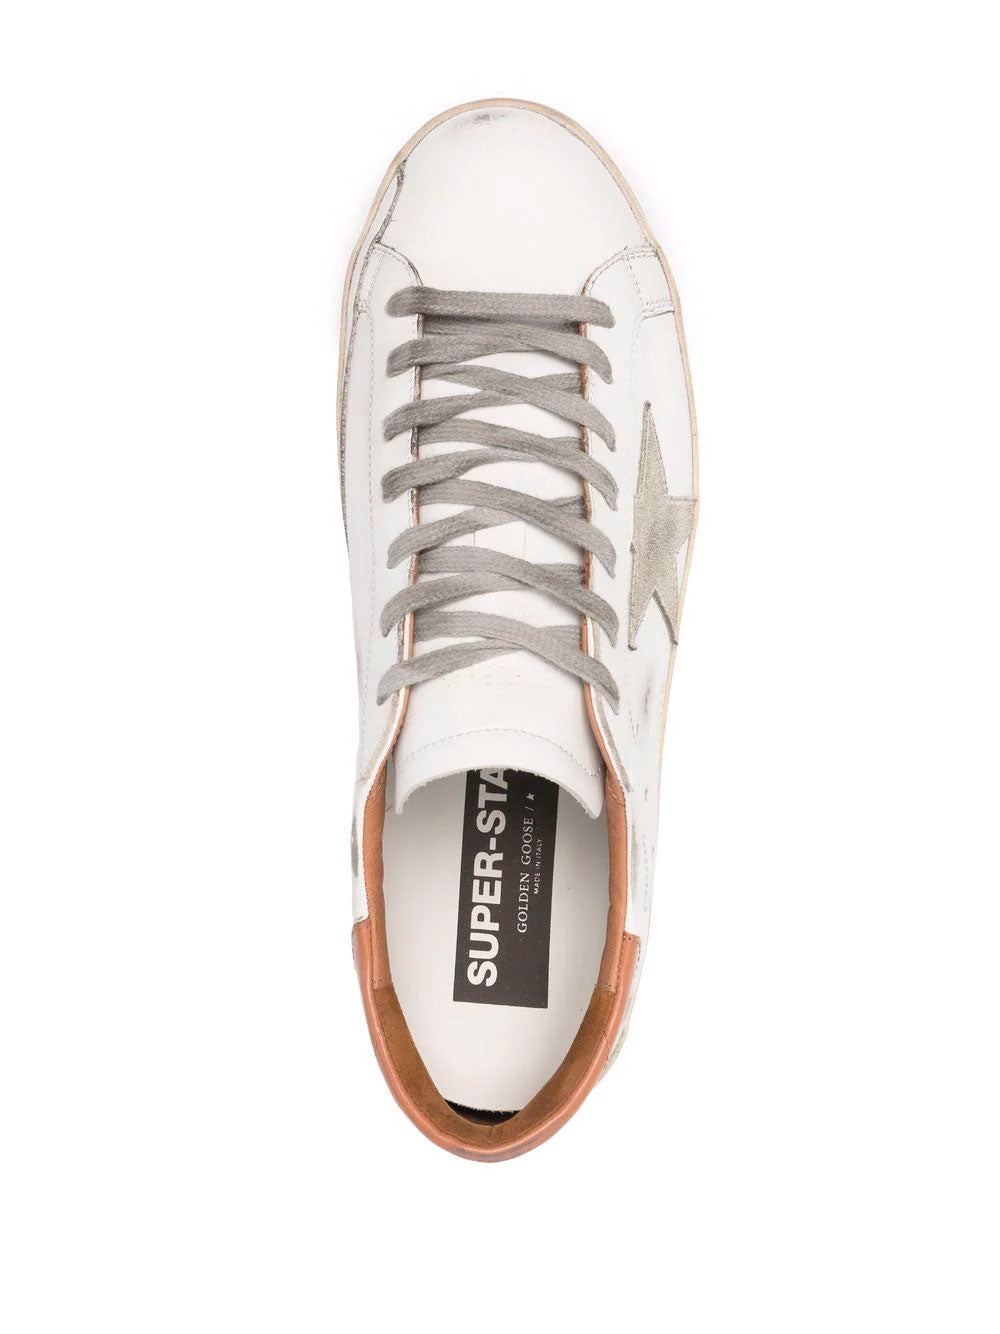 White Super-Star sneakers with grey star